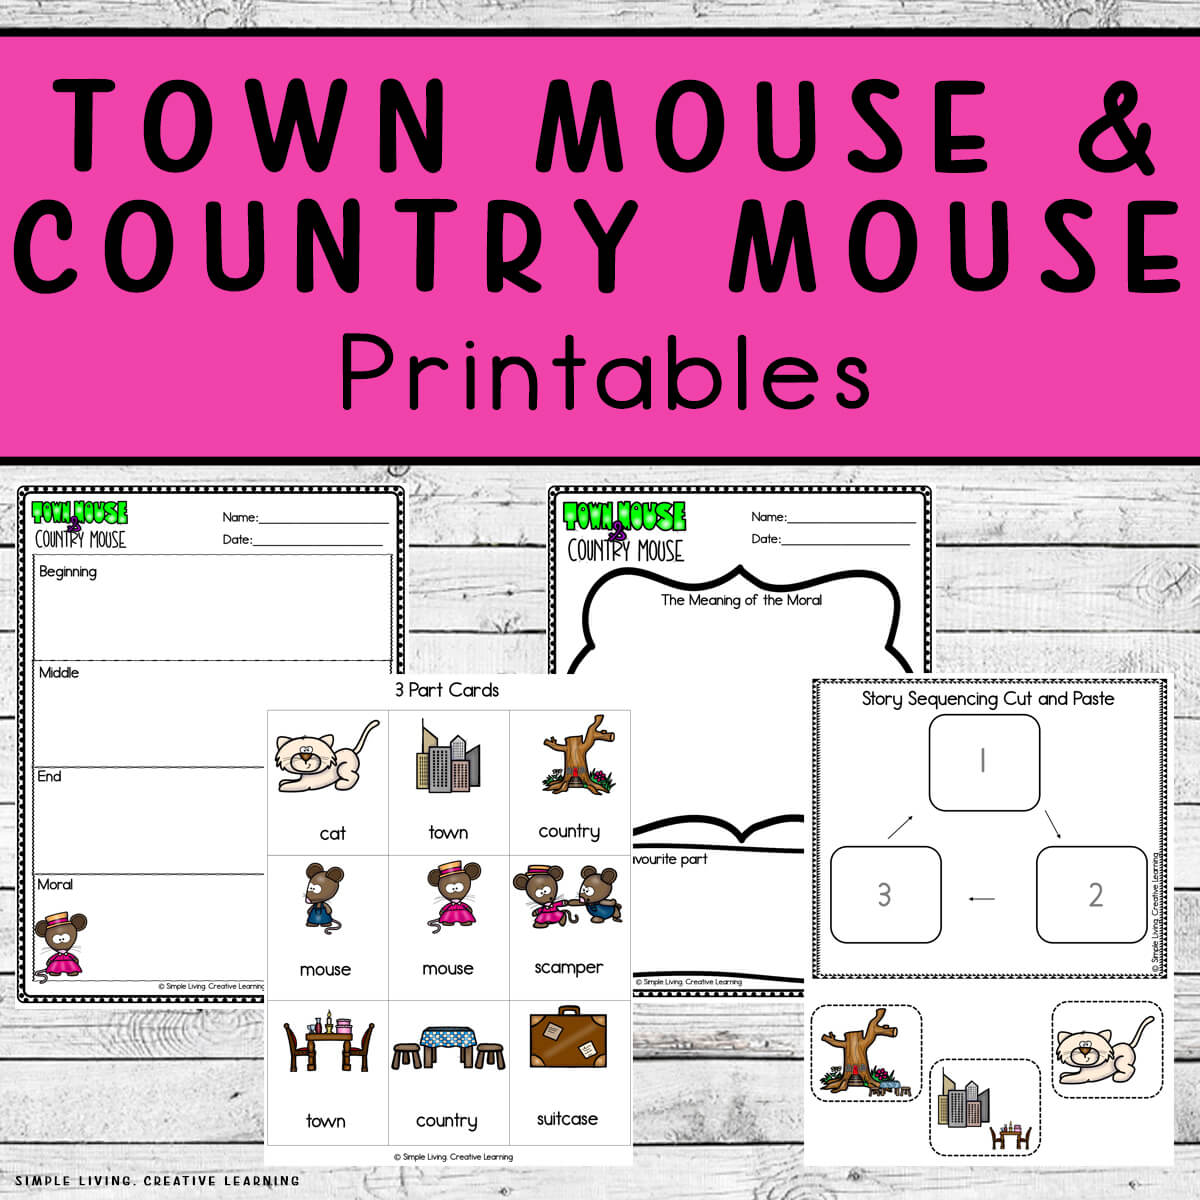 Town Mouse and Country Mouse Printables four pages